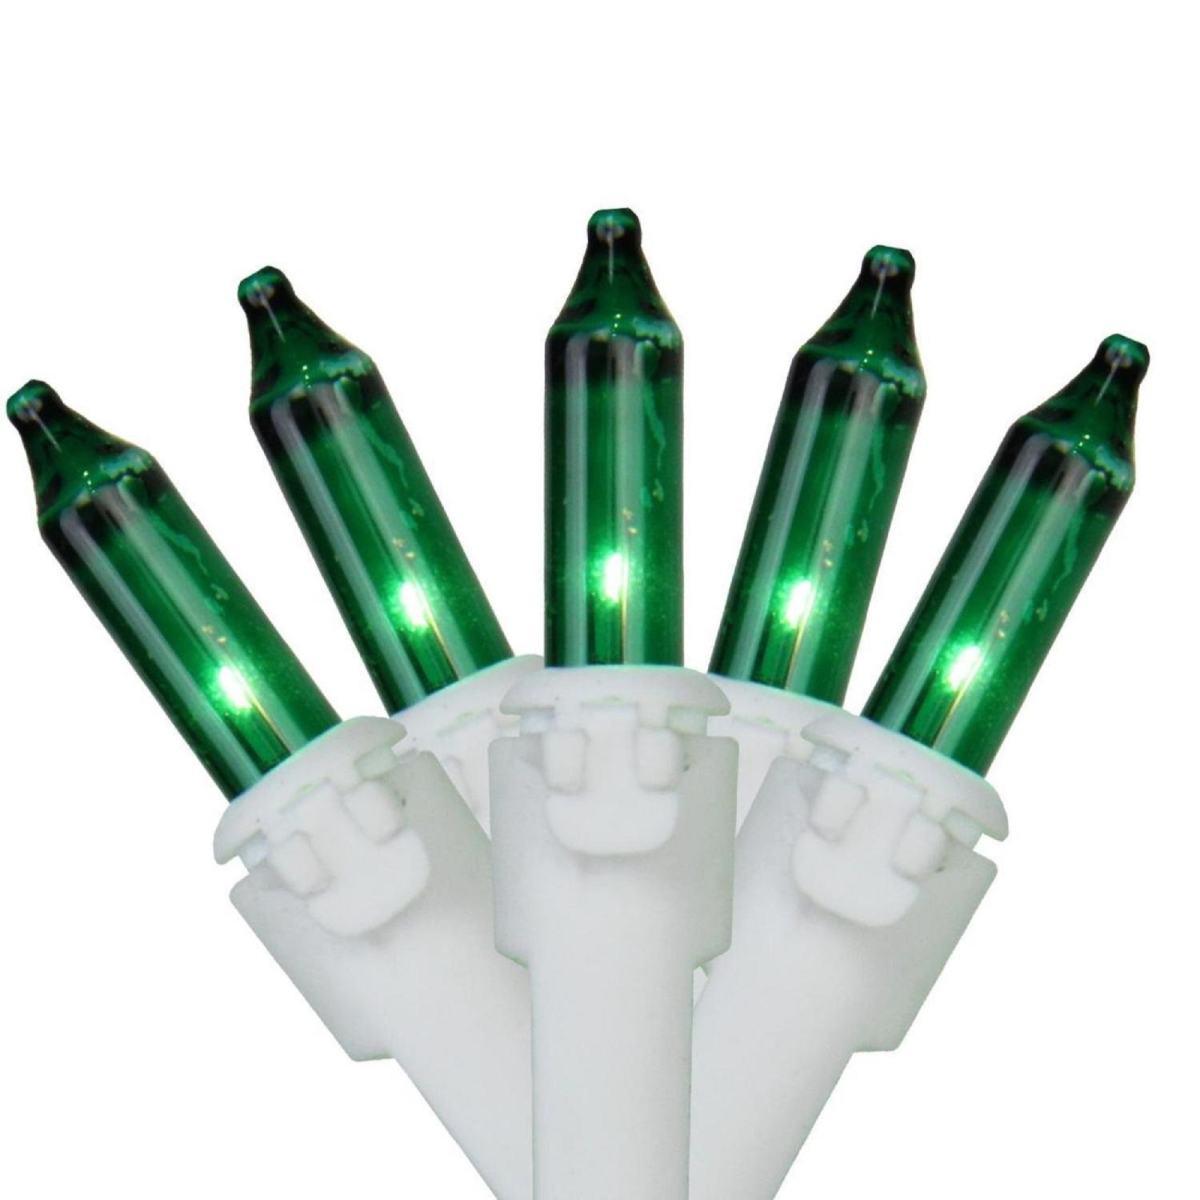 Picture of Brite Star 32635897 49.5 ft. White Wire Green Mini Christmas Light Set - 100 Count